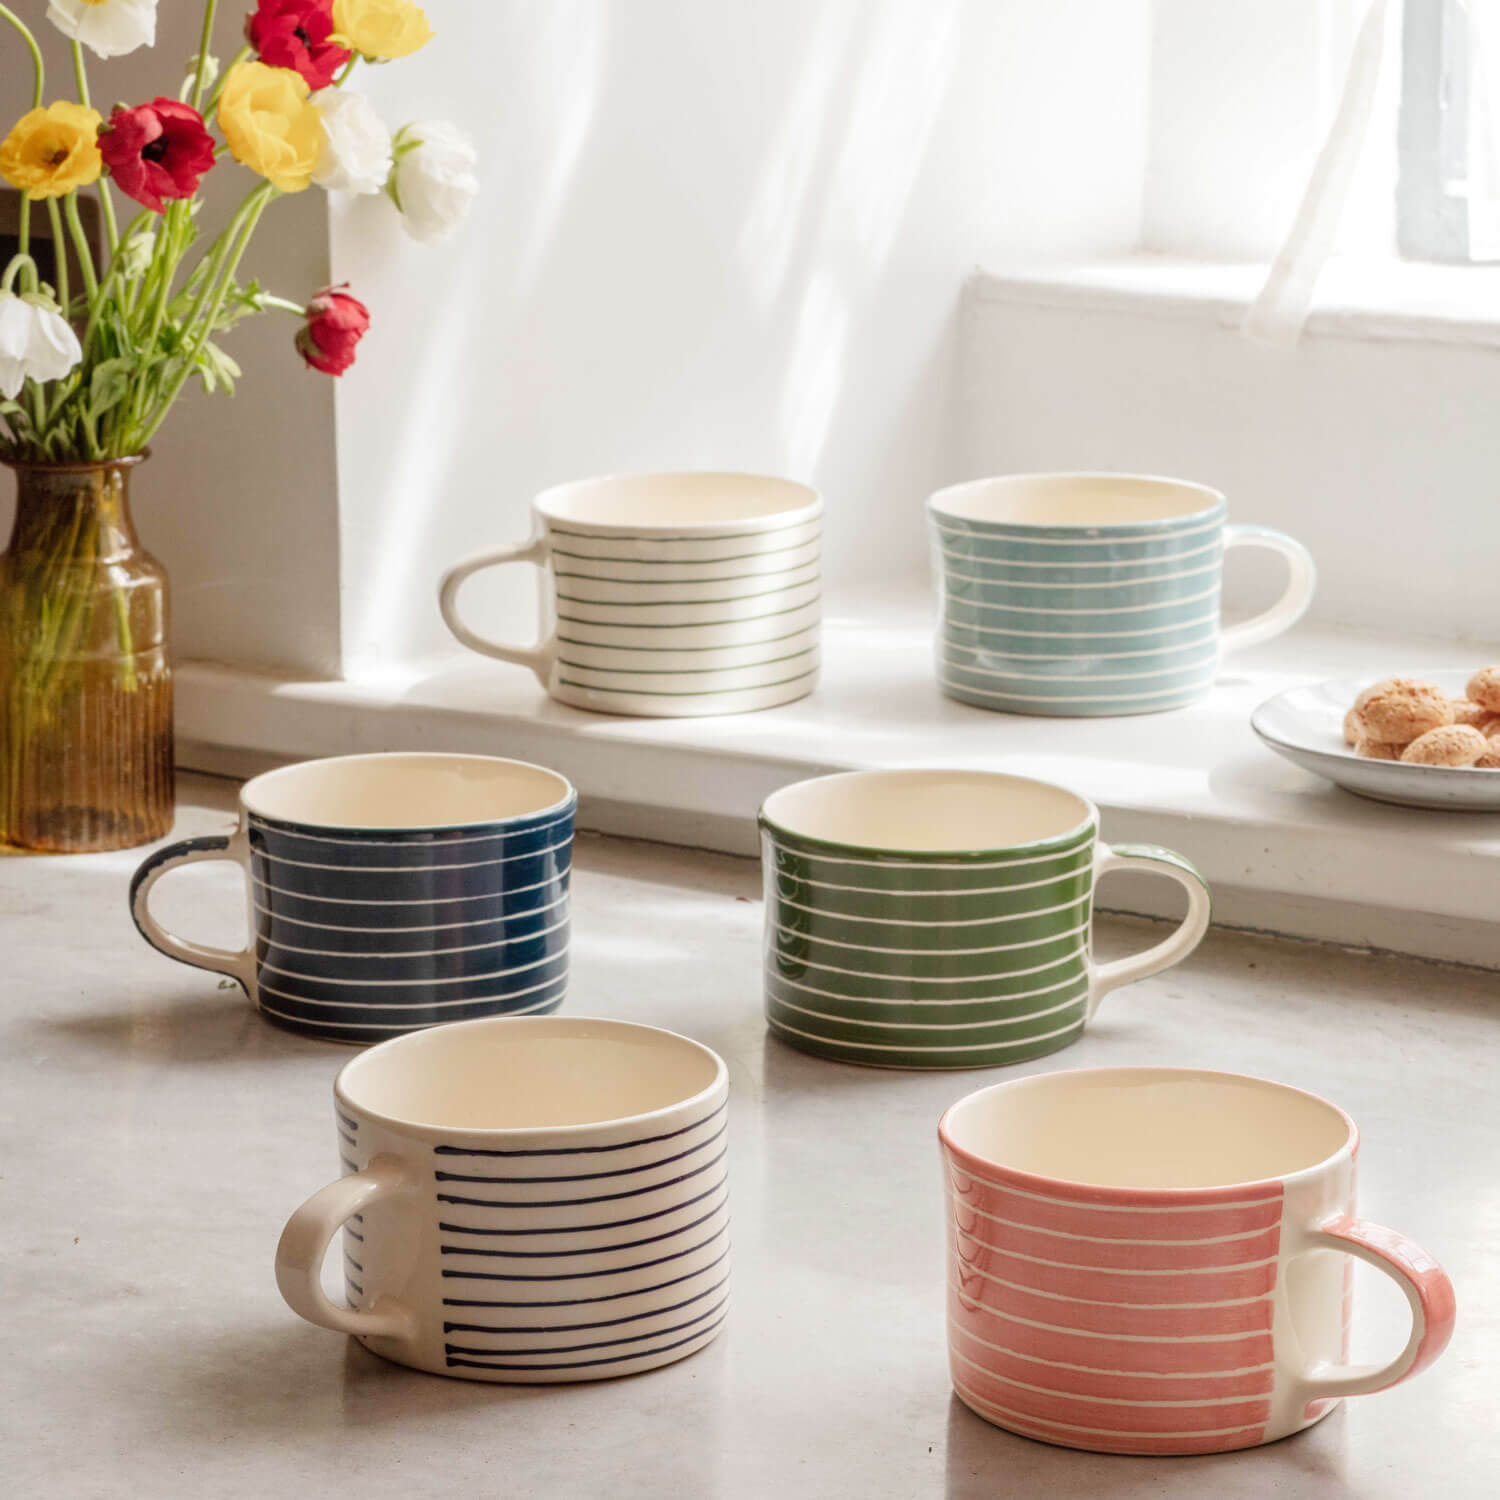 Read more about Graham and green grey striped mug